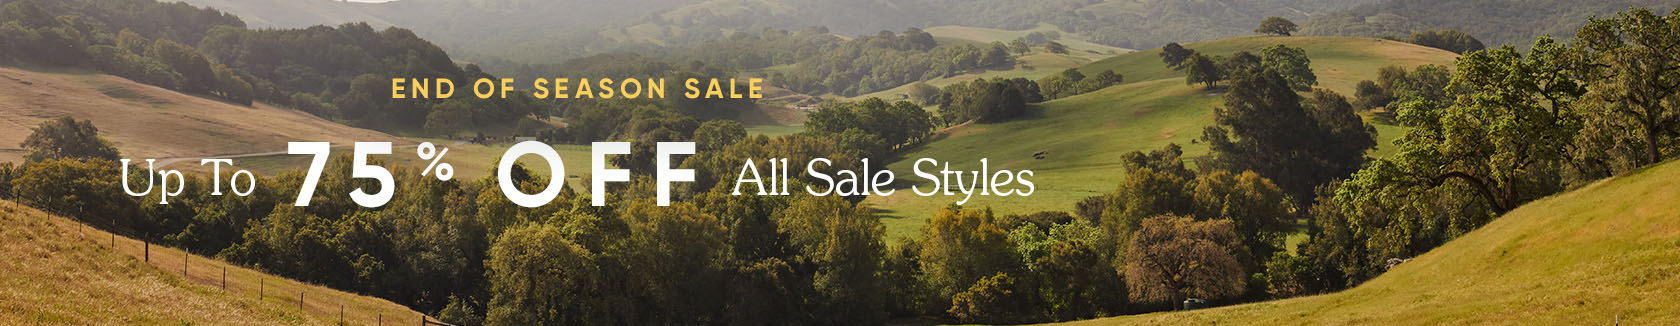 end of season sale shop up to 70% off all sale styles